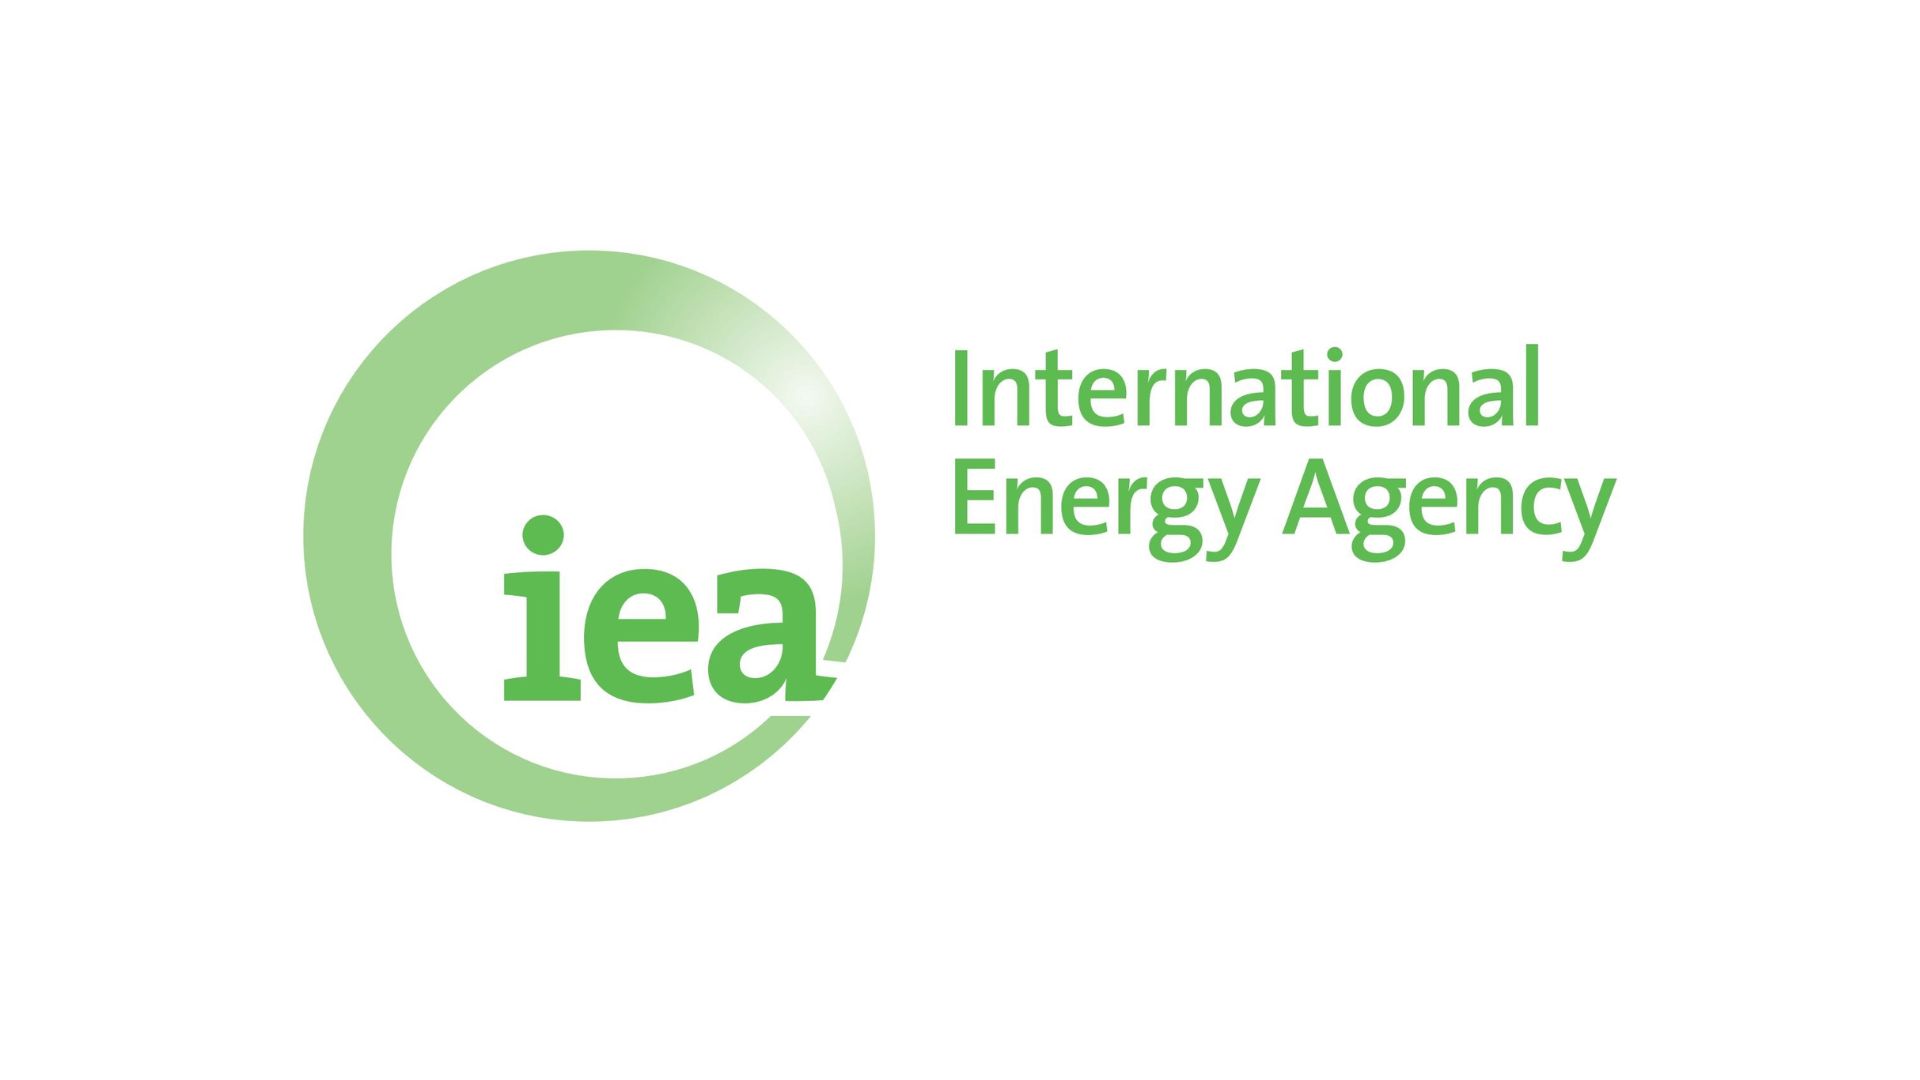 IEA to Host First Global Summit on People-Centred Clean Energy Transitions on April 26